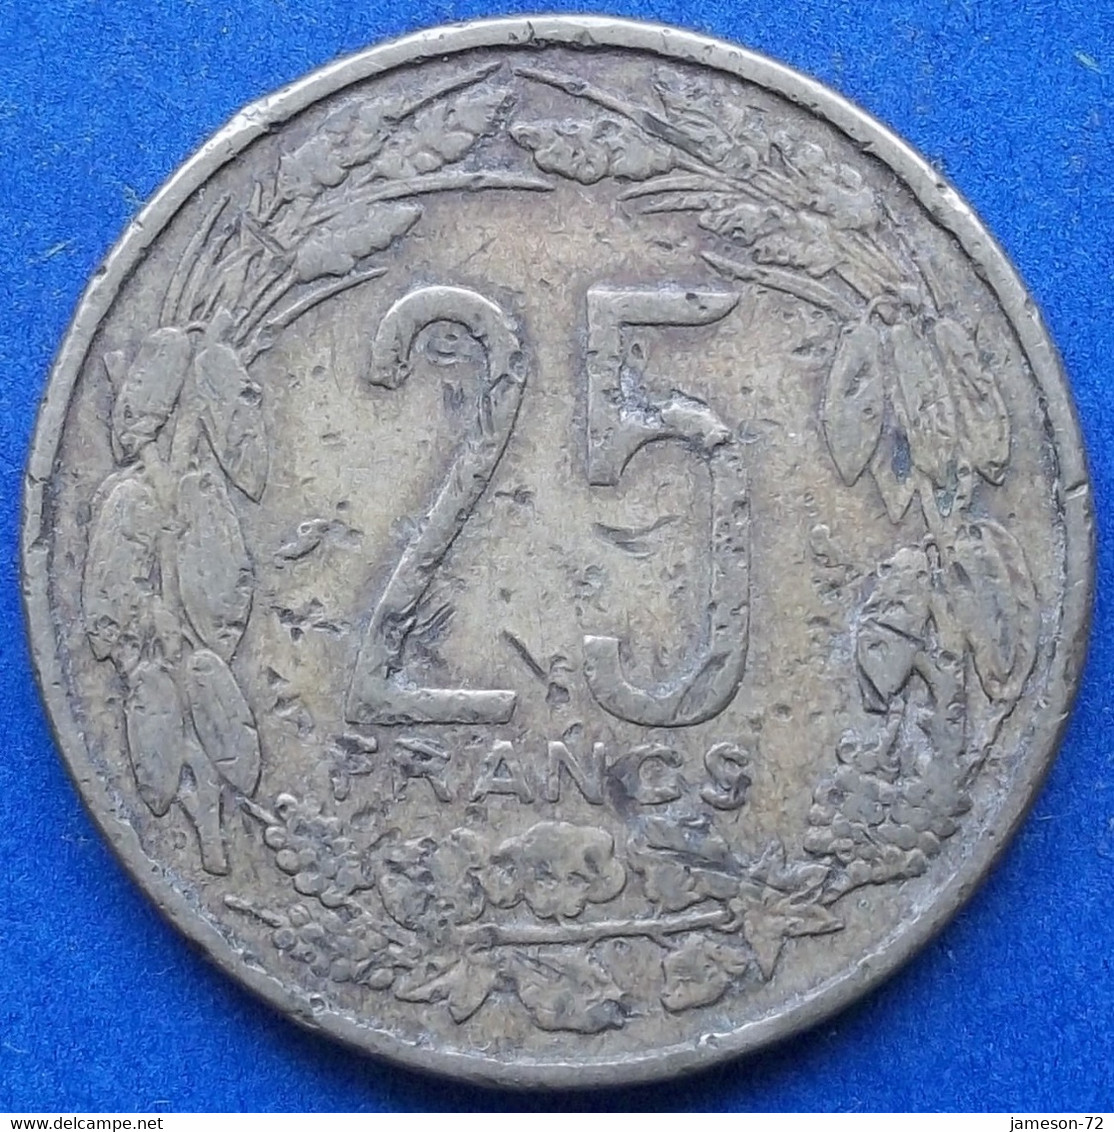 CAMEROON · EQUATORIAL AFRICAN STATES - 25 Francs 1972 KM# 4a Independent Republic (1960) - Edelweiss Coins - Kameroen